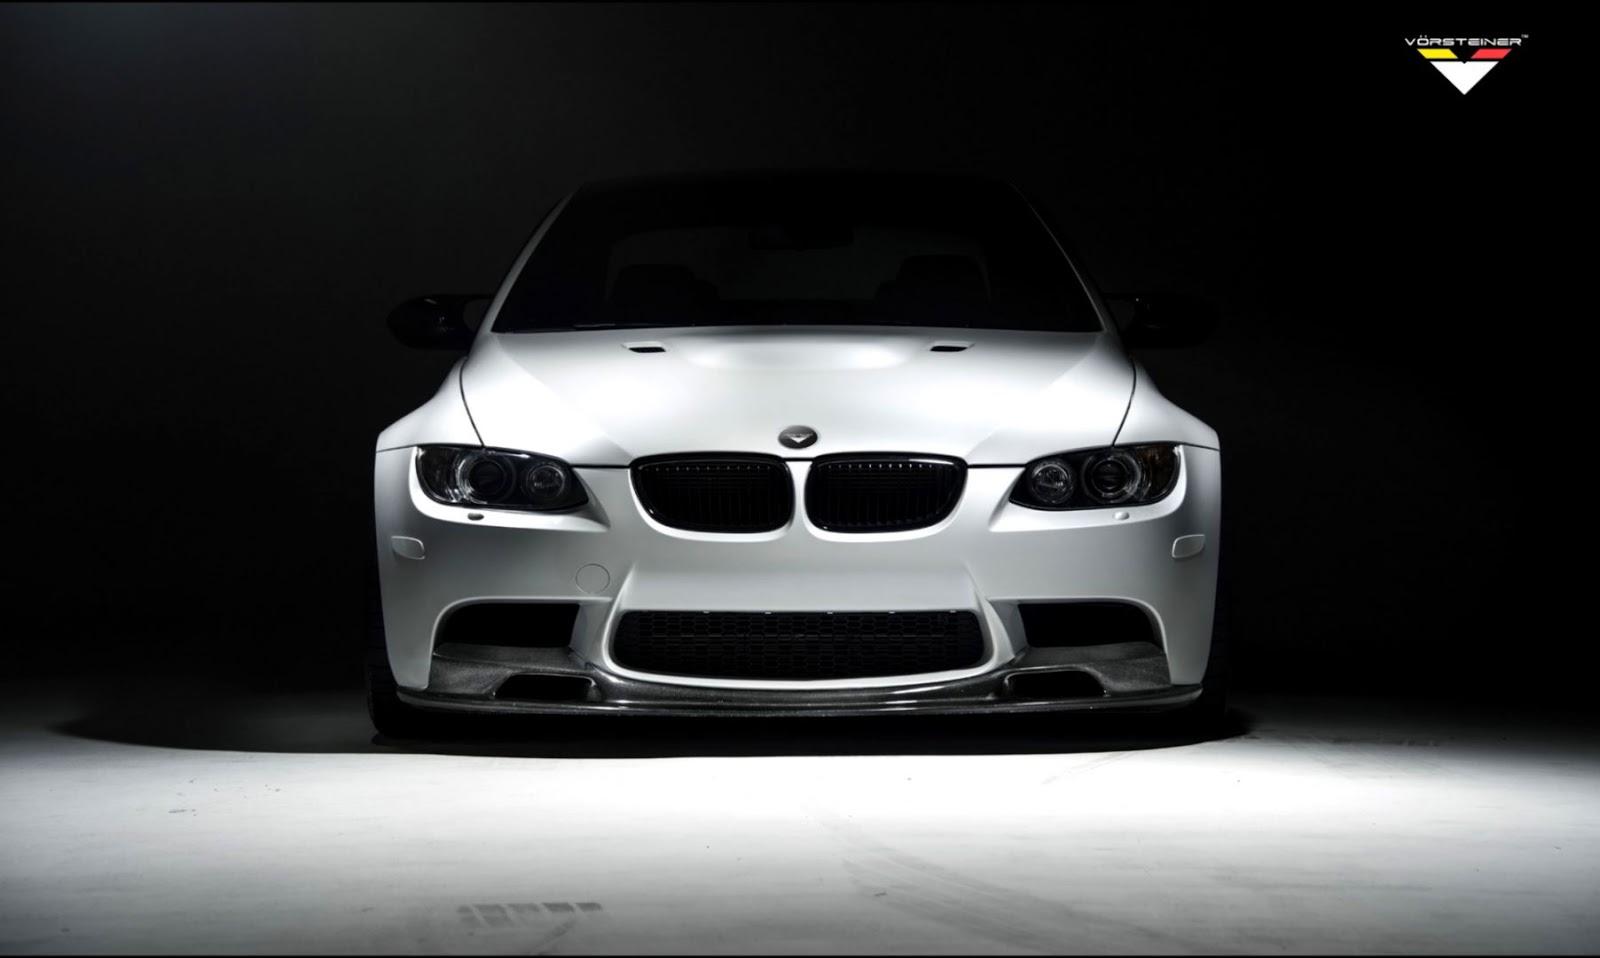 Bmw M3 Wallpaper White Car. All in One Wallpaper